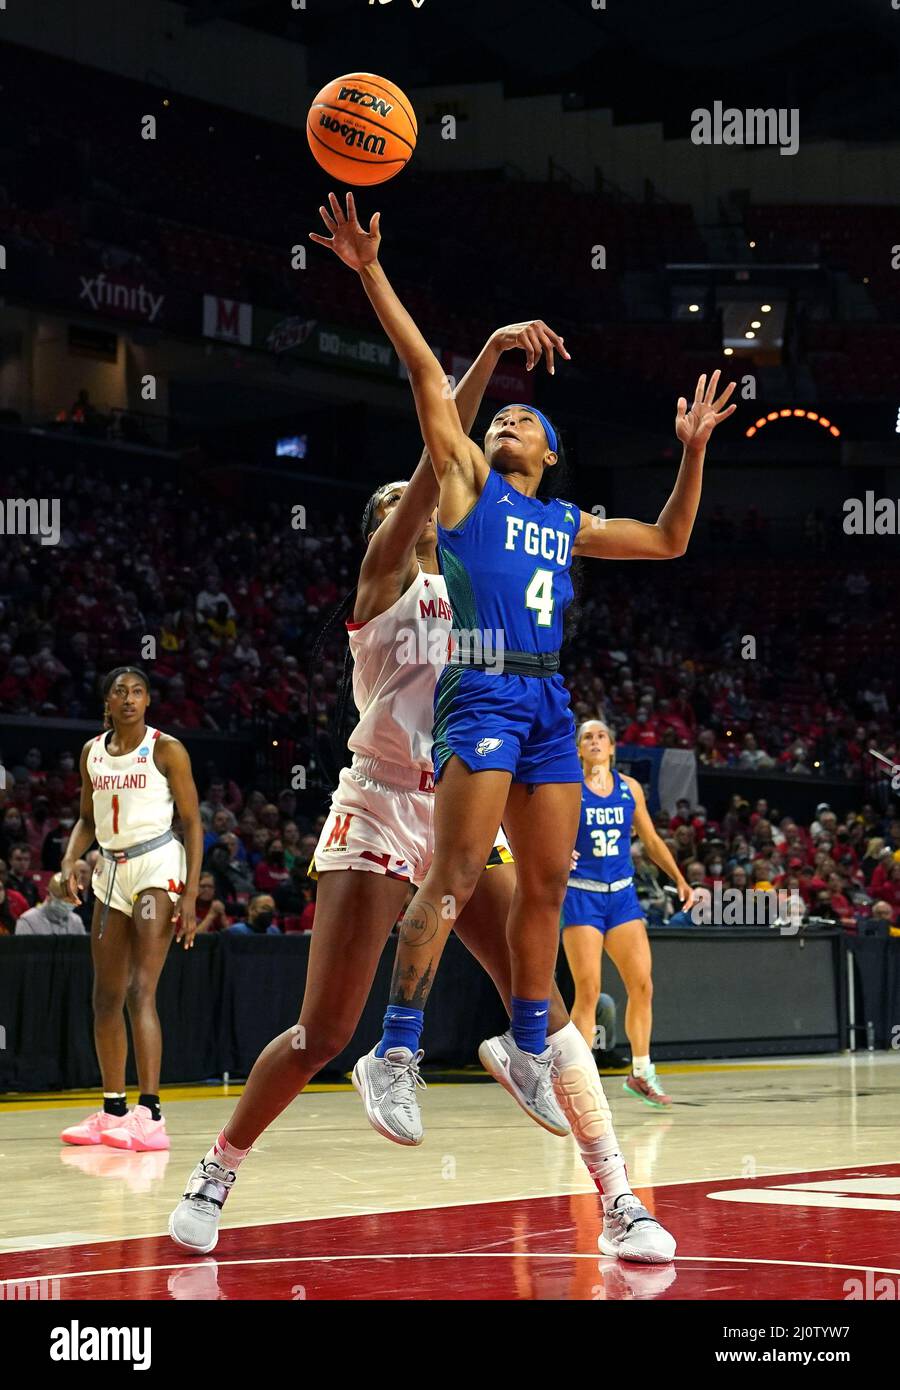 COLLEGE PARK, Maryland, USA - 20 MARCH 2022: Florida Gulf Coast Eagles guard Tishara Morehouse (4) beats Maryland Terrapins forward Angel Reese (10) for a shot during a NCAA women's basketball tournament second round game between the Maryland Terrapins and the Florida Gulf Coast Eagles, on March 20, 2022, at Xfinity Center, in College Park, Maryland. (Photo by Tony Quinn-Alamy Live News) Stock Photo